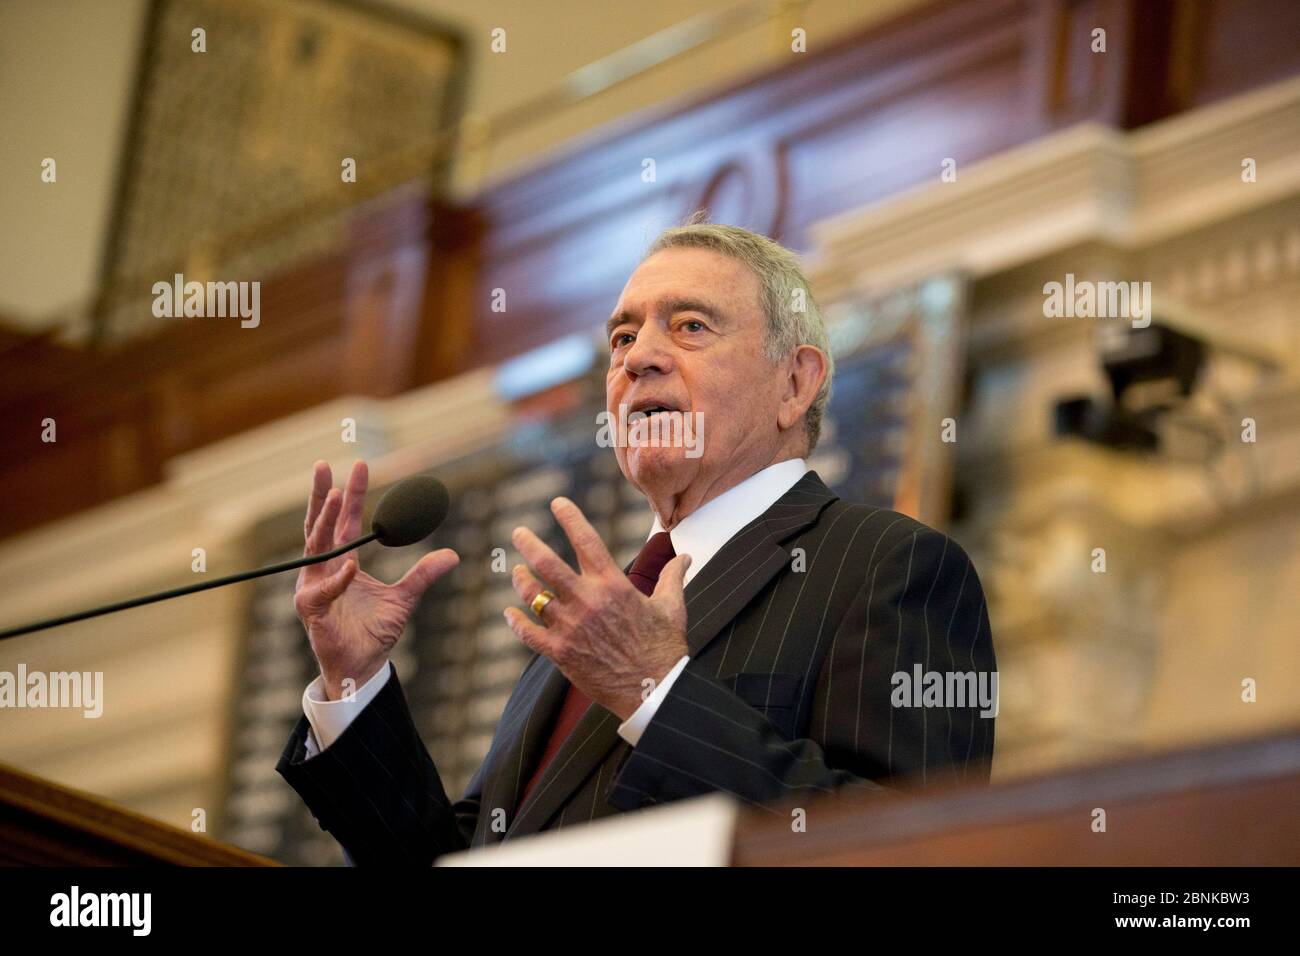 Austin Texas USA, October 2012: Journalist Dan Rather speaks at the Texas Book Festival on his latest work, 'Rather Outspoken,' about his years as a CBS broadcast journalist. Rather discussed what he says is a lack of credibility in much of today's television journalism.   October 2012. ©Bob Daemmrich Stock Photo